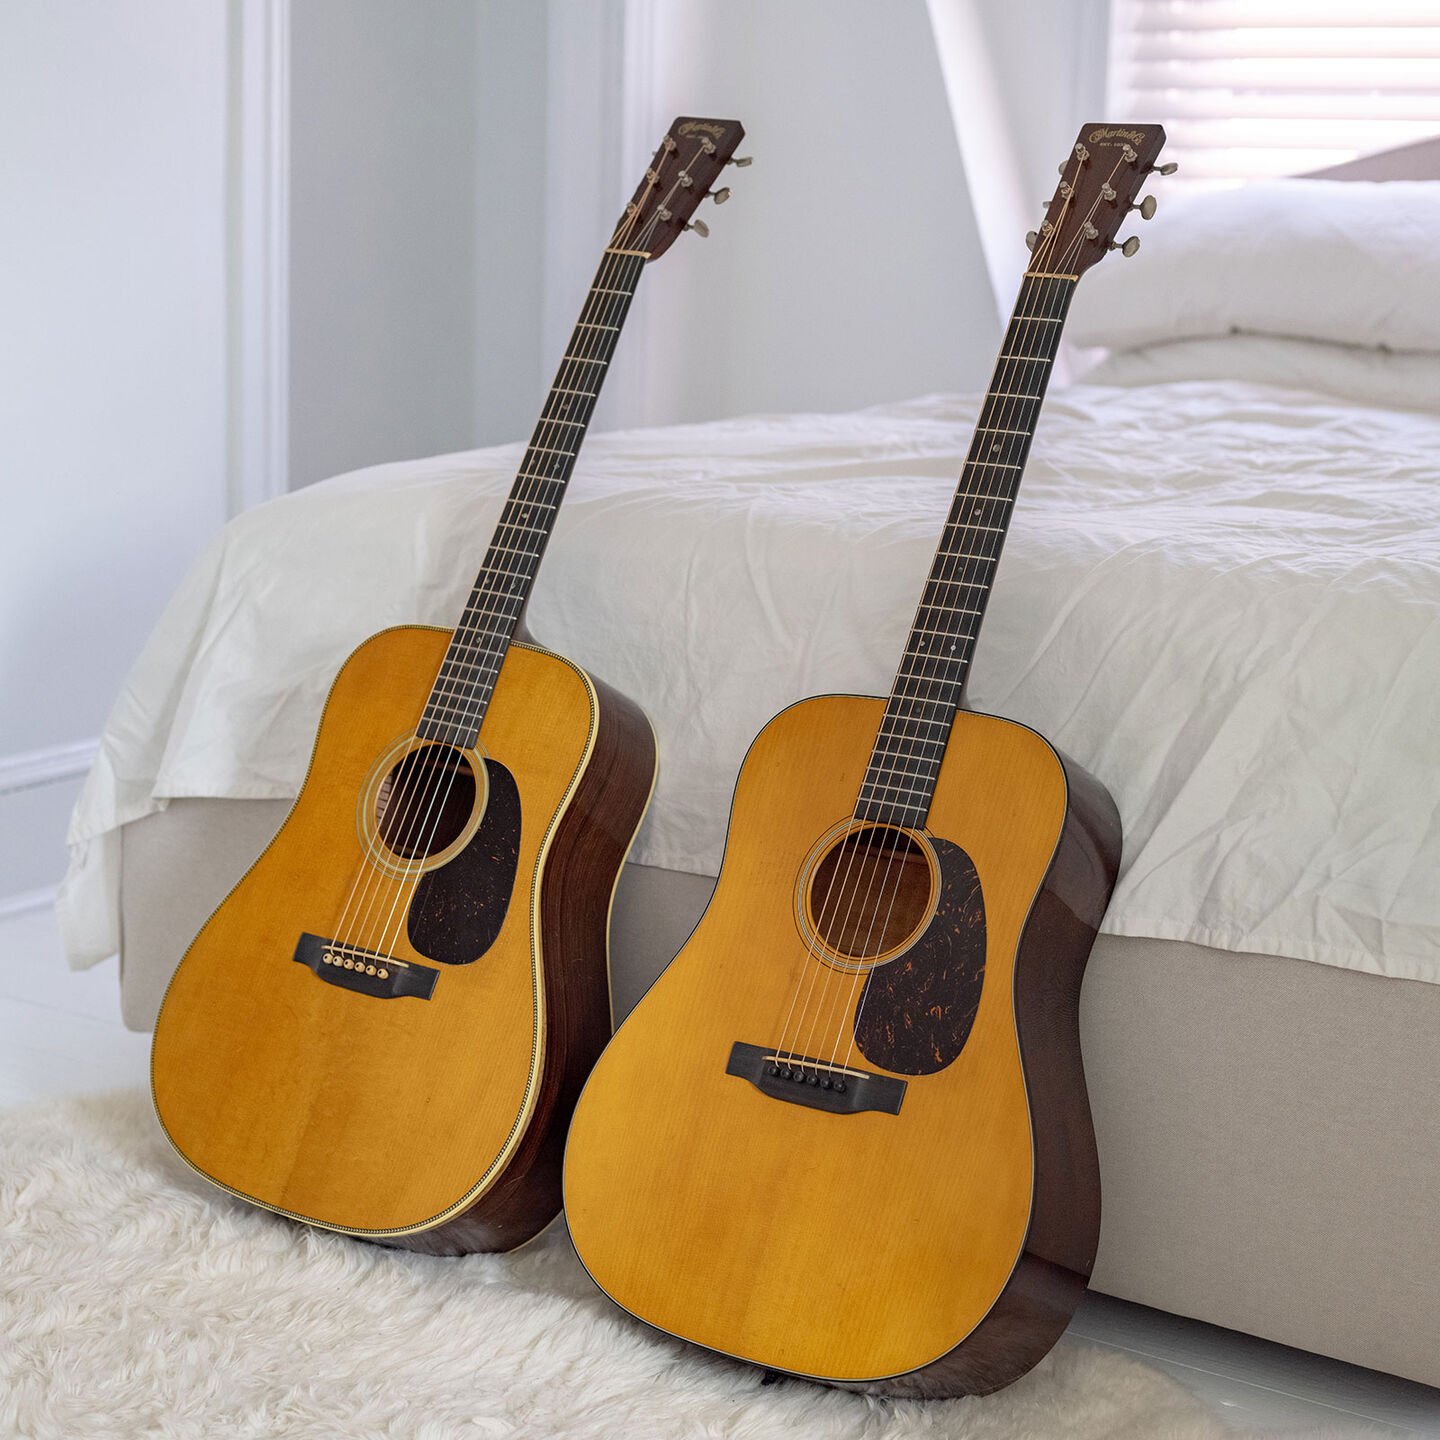 Two acoustic guitars sitting upright on a white floor